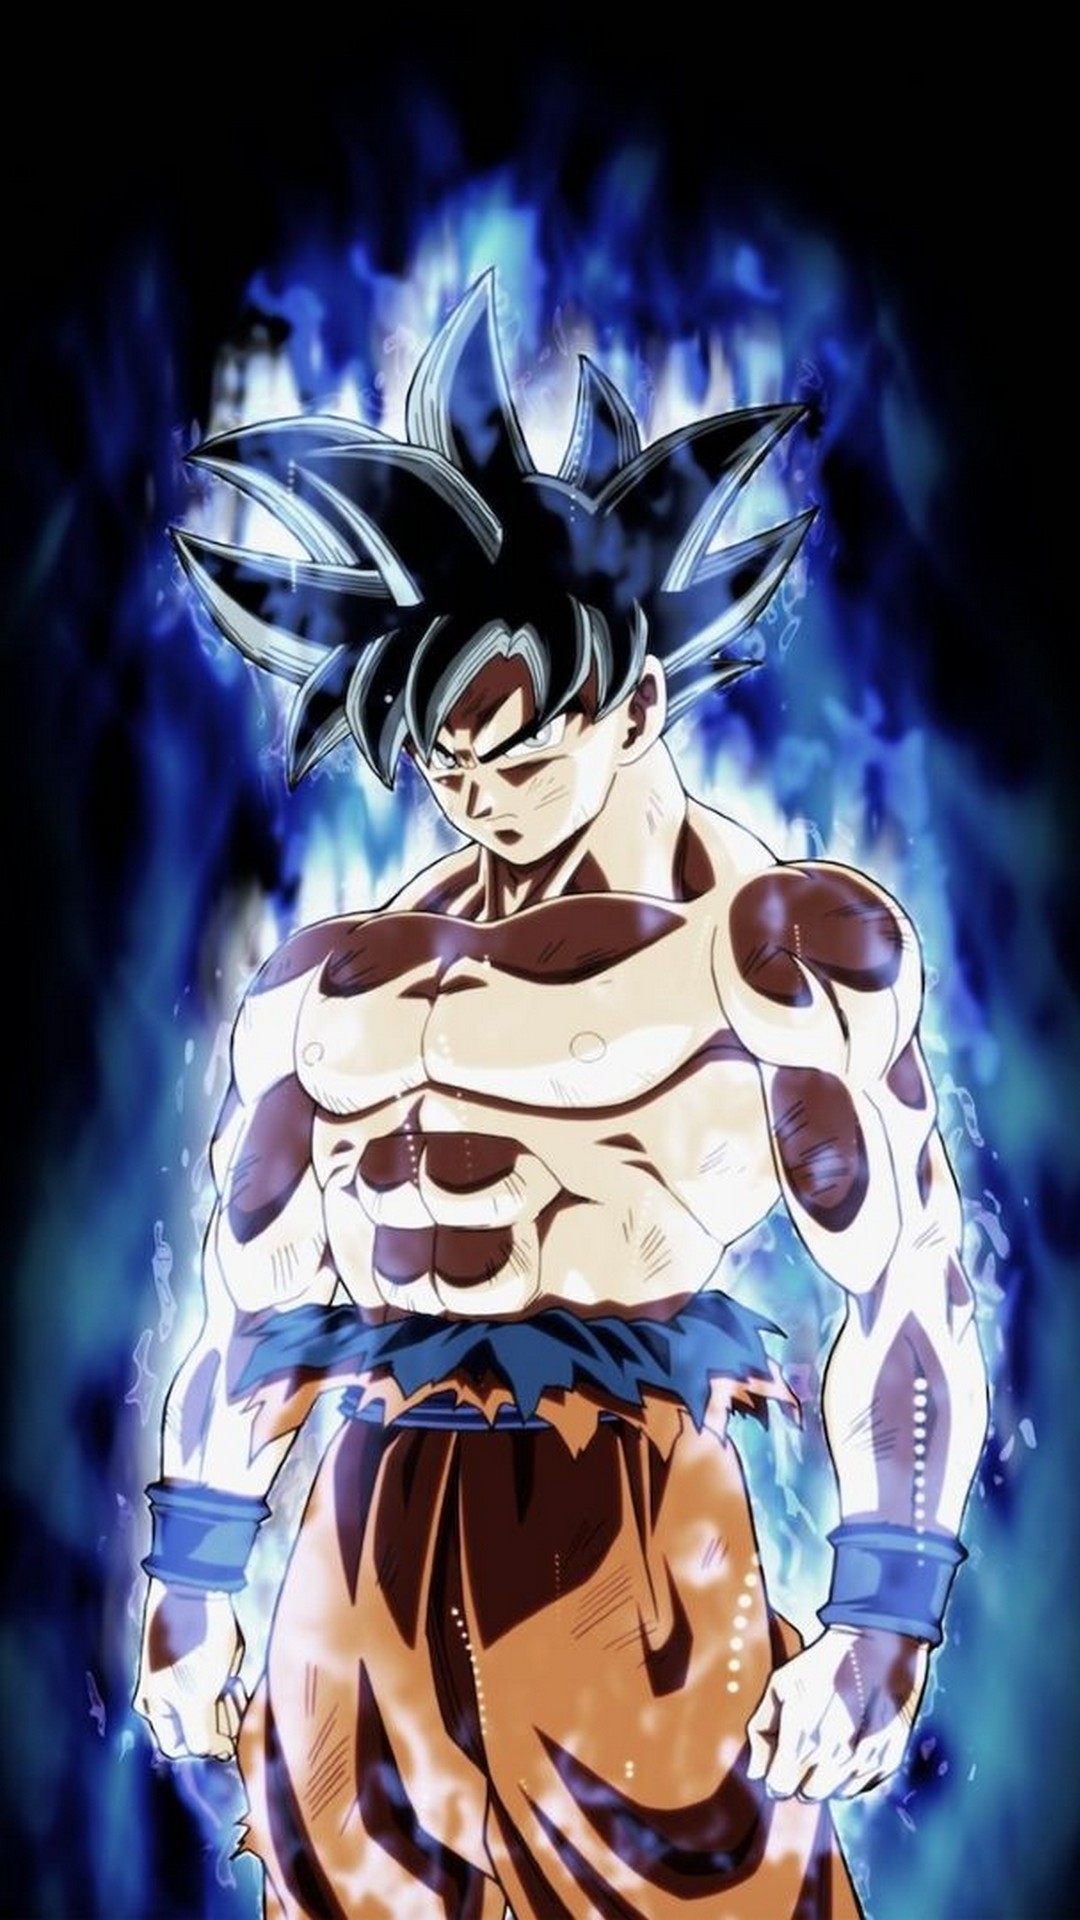 Wallpaper iPhone Goku Images with resolution 1080X1920 pixel. You can make this wallpaper for your iPhone 5, 6, 7, 8, X backgrounds, Mobile Screensaver, or iPad Lock Screen